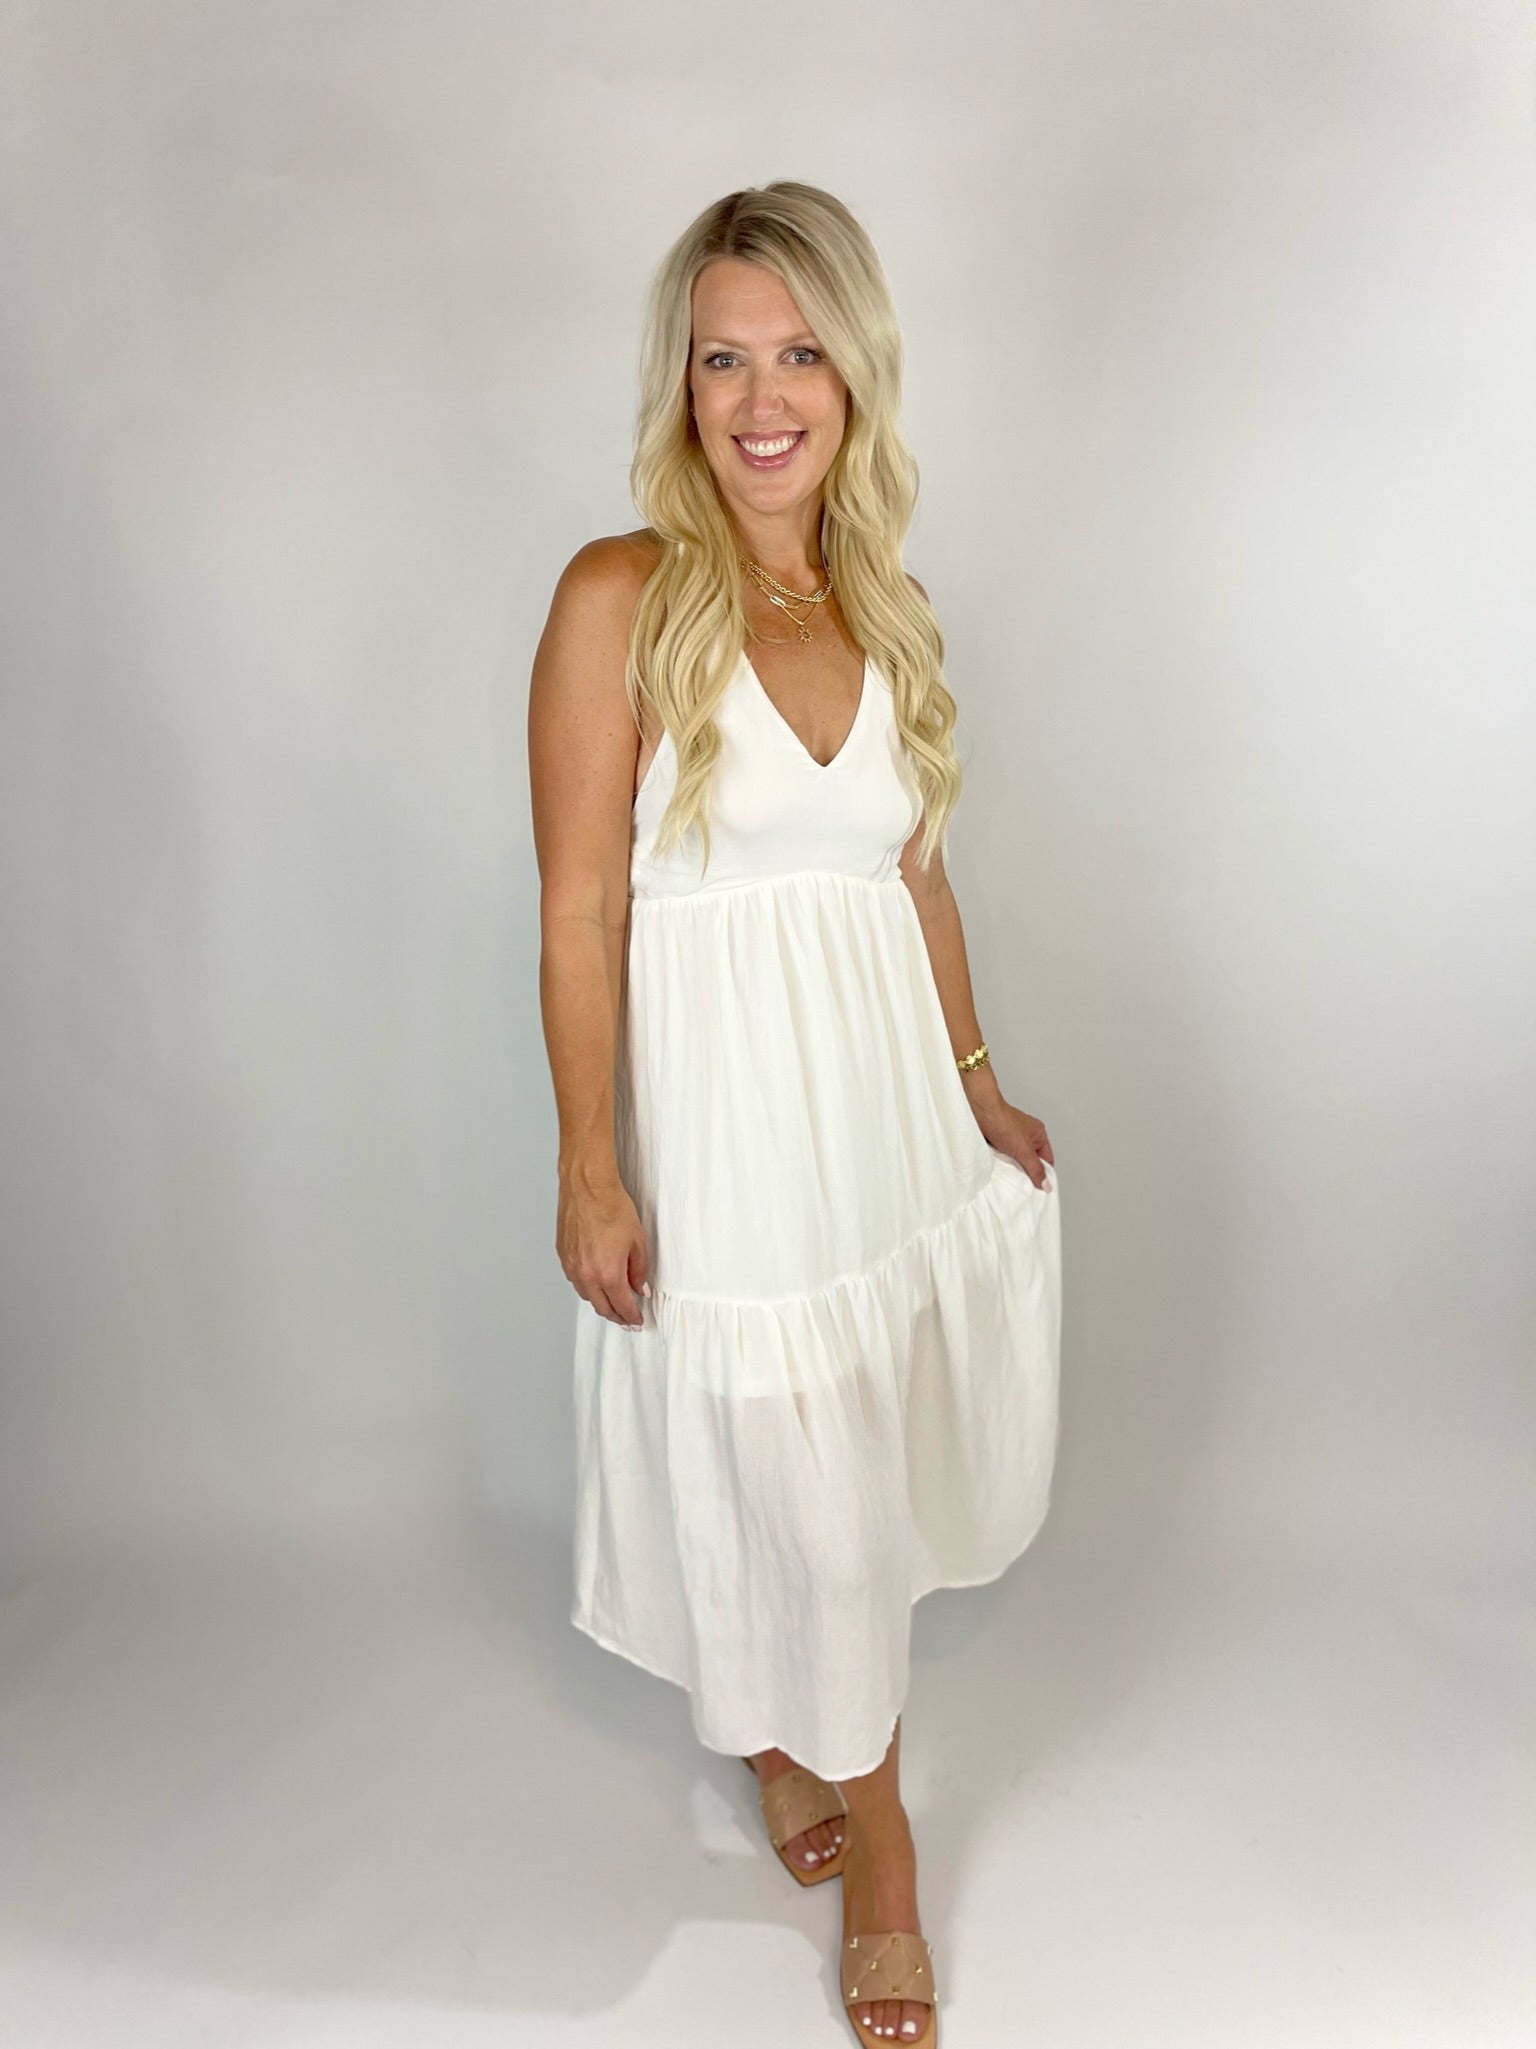 Vacation Ready White Beachy Dress With Braided Straps